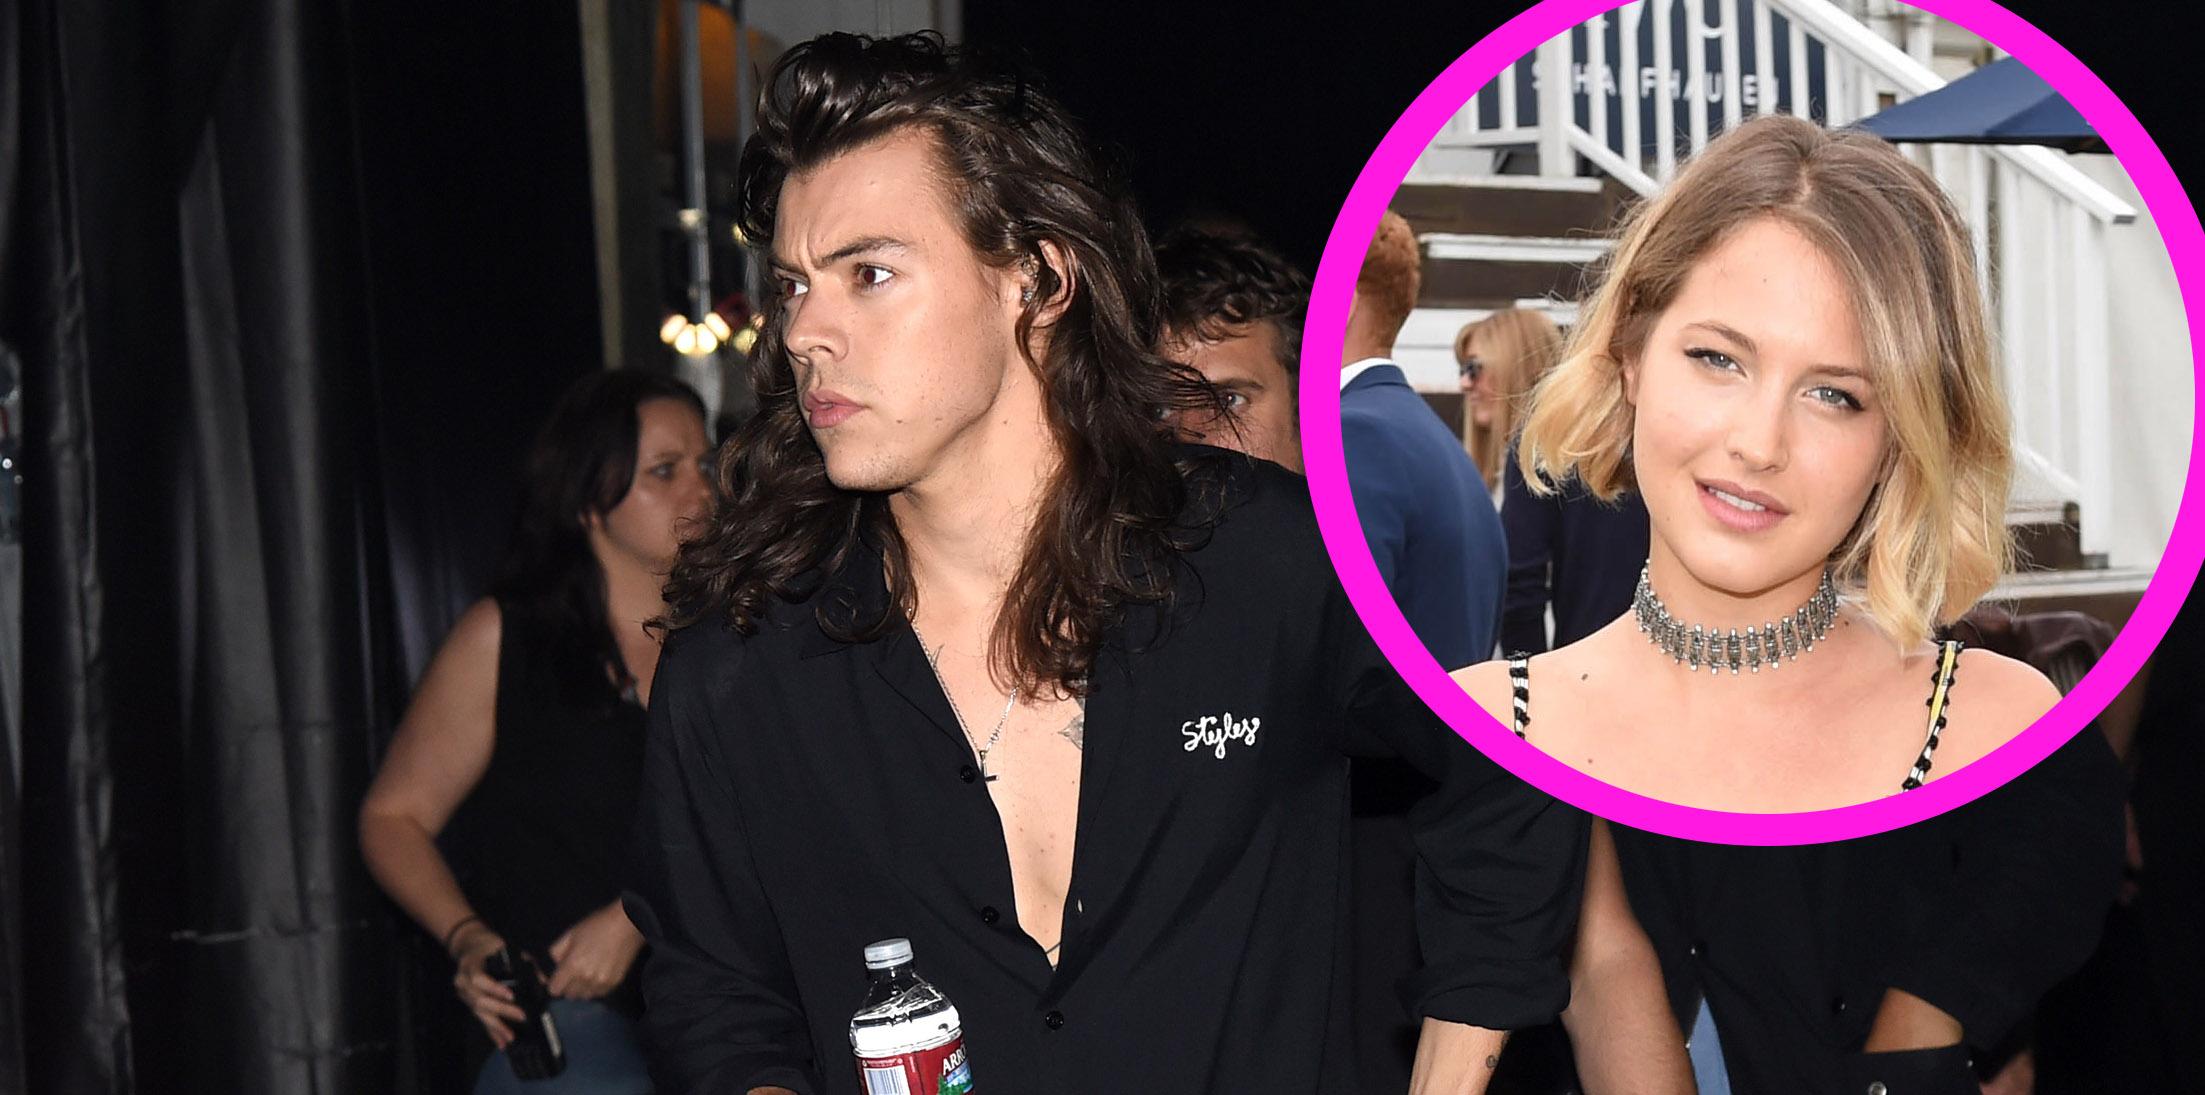 Who is Harry Styles dating? Every woman Harry has been linked to